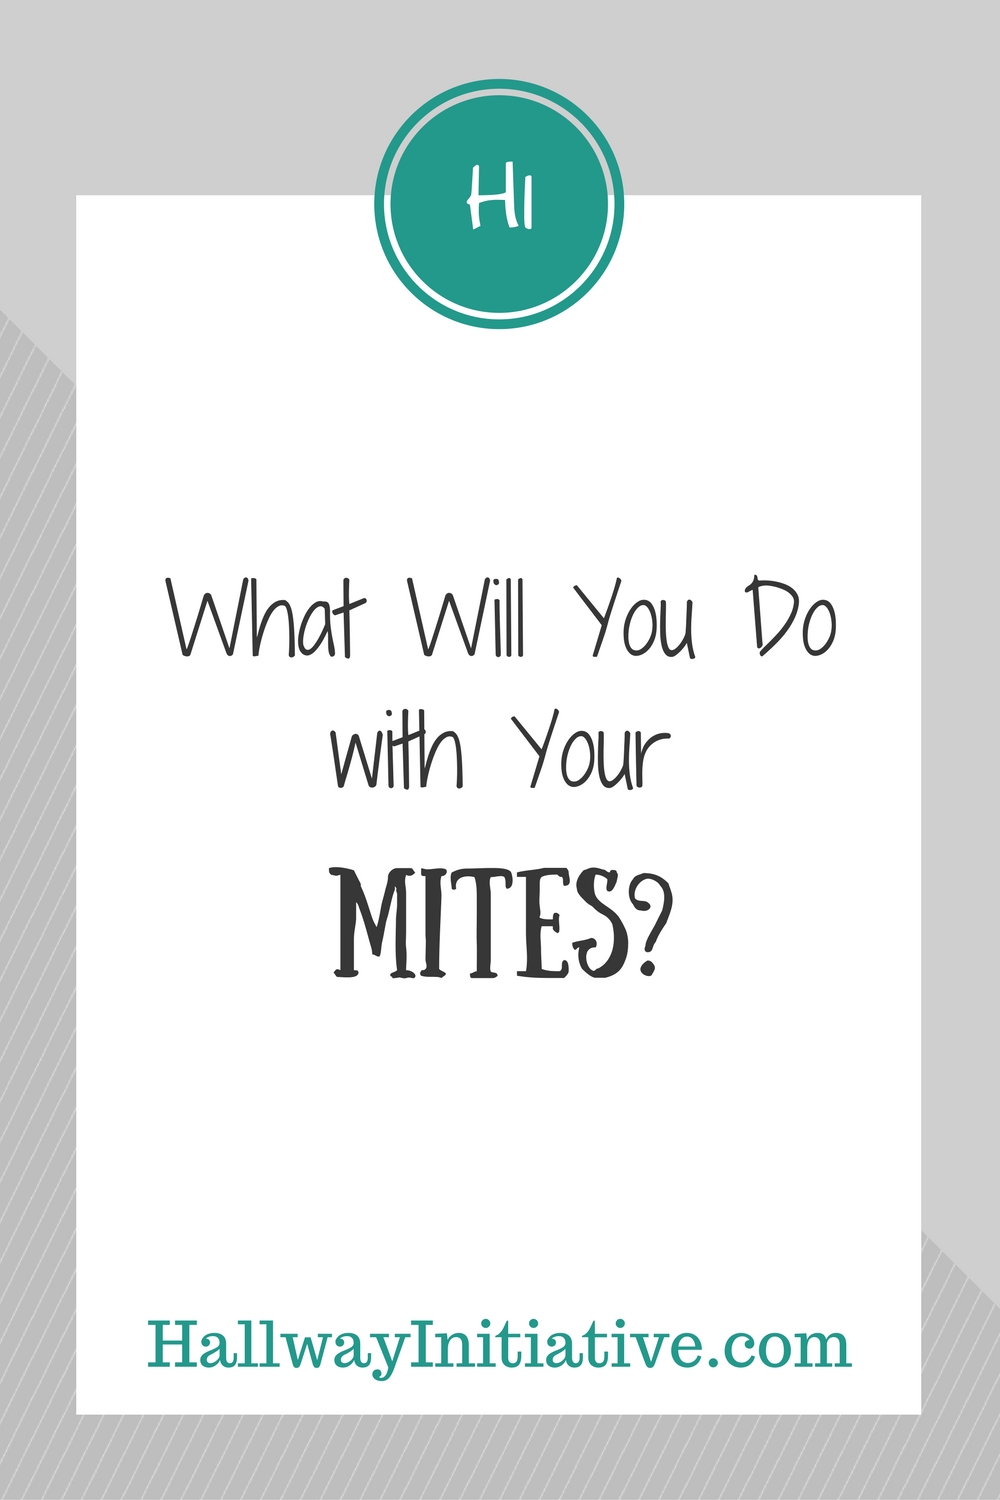 What will you do with your mites?